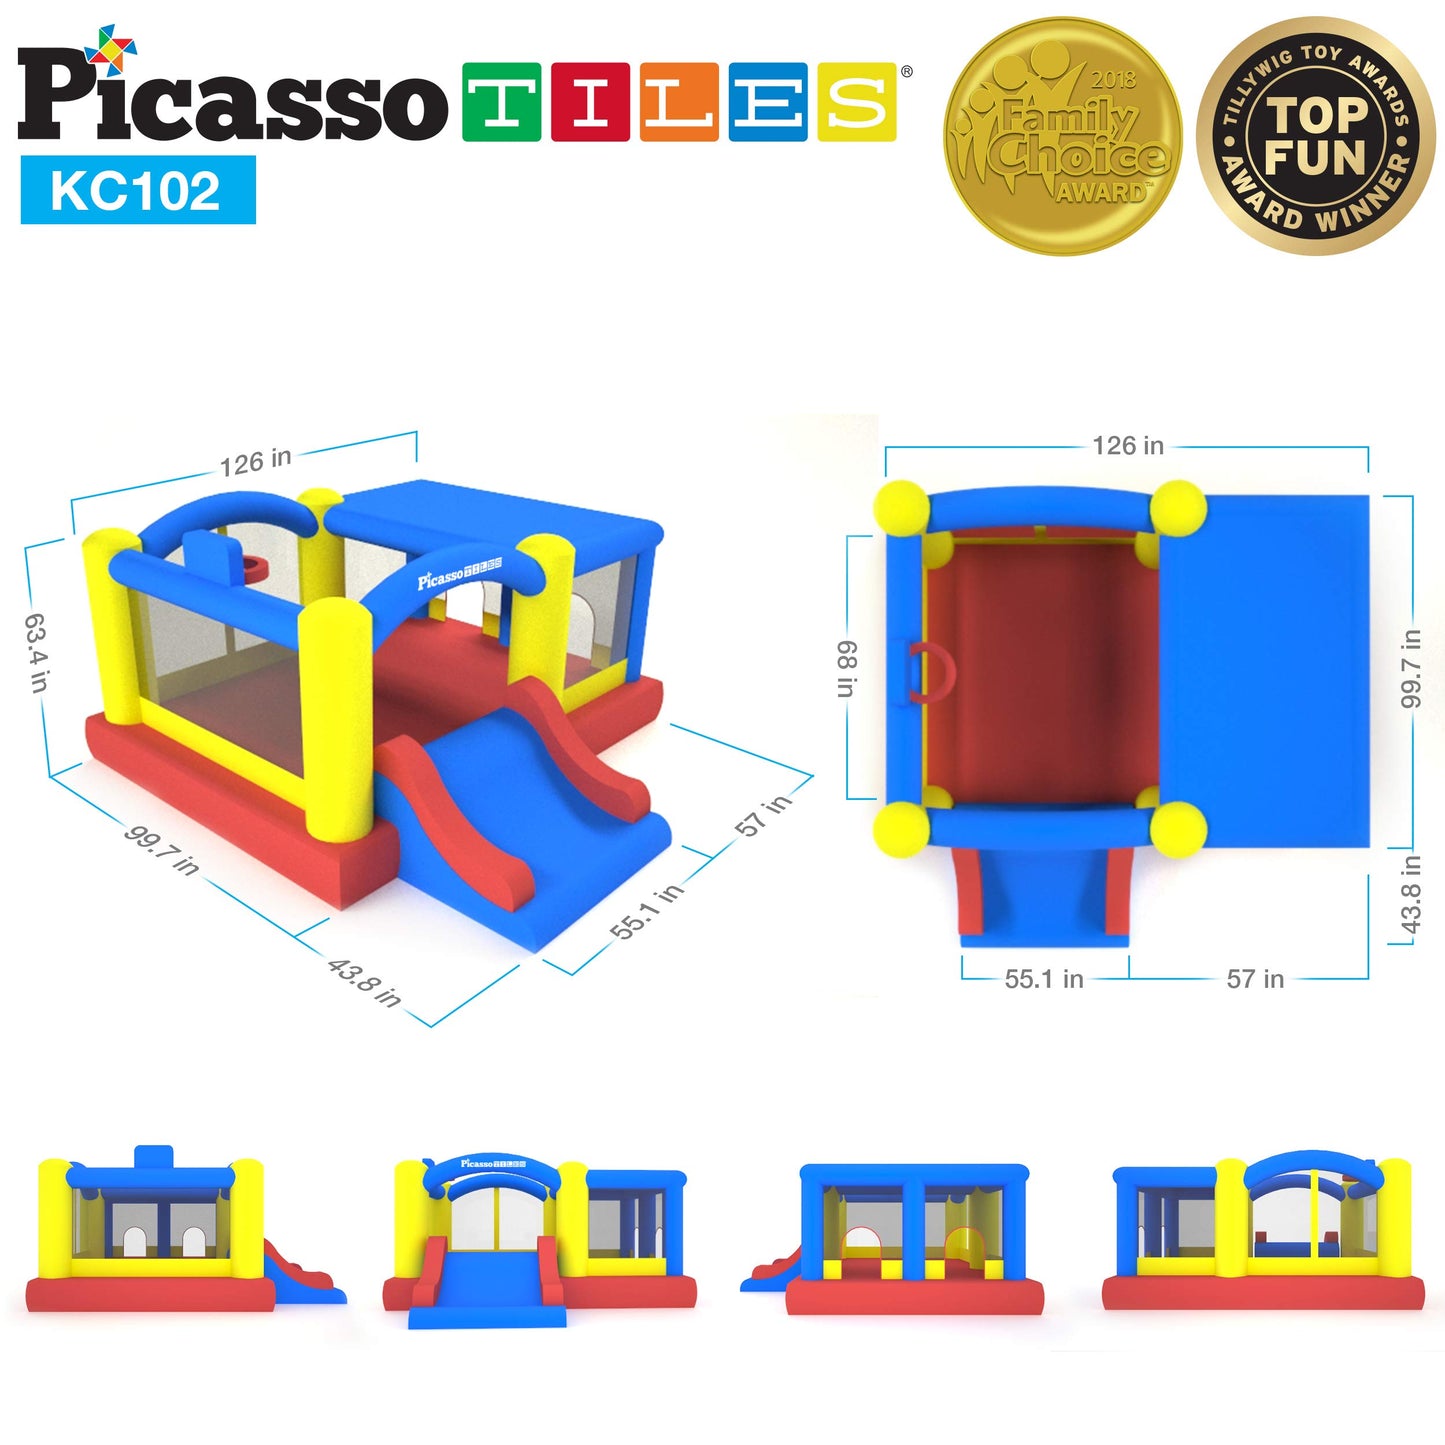 [Upgrade Version] Picasso Toys KC102 12x10 Foot Inflatable Bouncer Jumping Bouncing House, Jump Slide, Dunk Playhouse w/ Basketball Rim, 4 Sports Balls, Full-Size Entry, 580W ETL Certified Blower Bounce House102